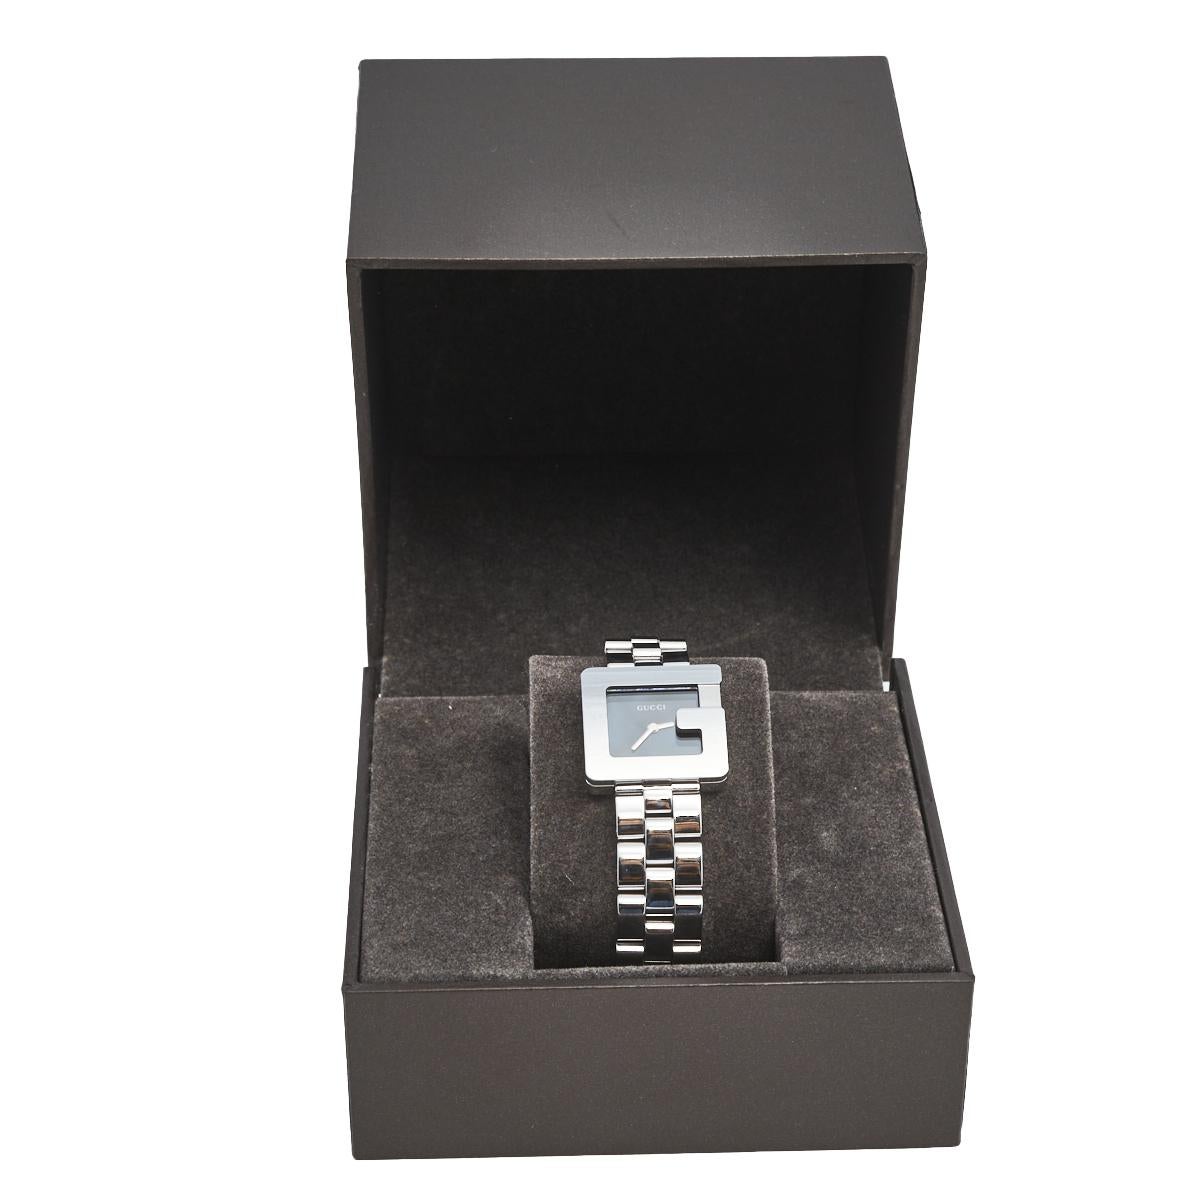 Gucci brings you this stunning wristwatch for you to flaunt on your wrist. It is crafted from stainless steel and powered by a quartz movement. It has a smooth G bezel and a magnificent black dial with the brand label and two hands. The watch is